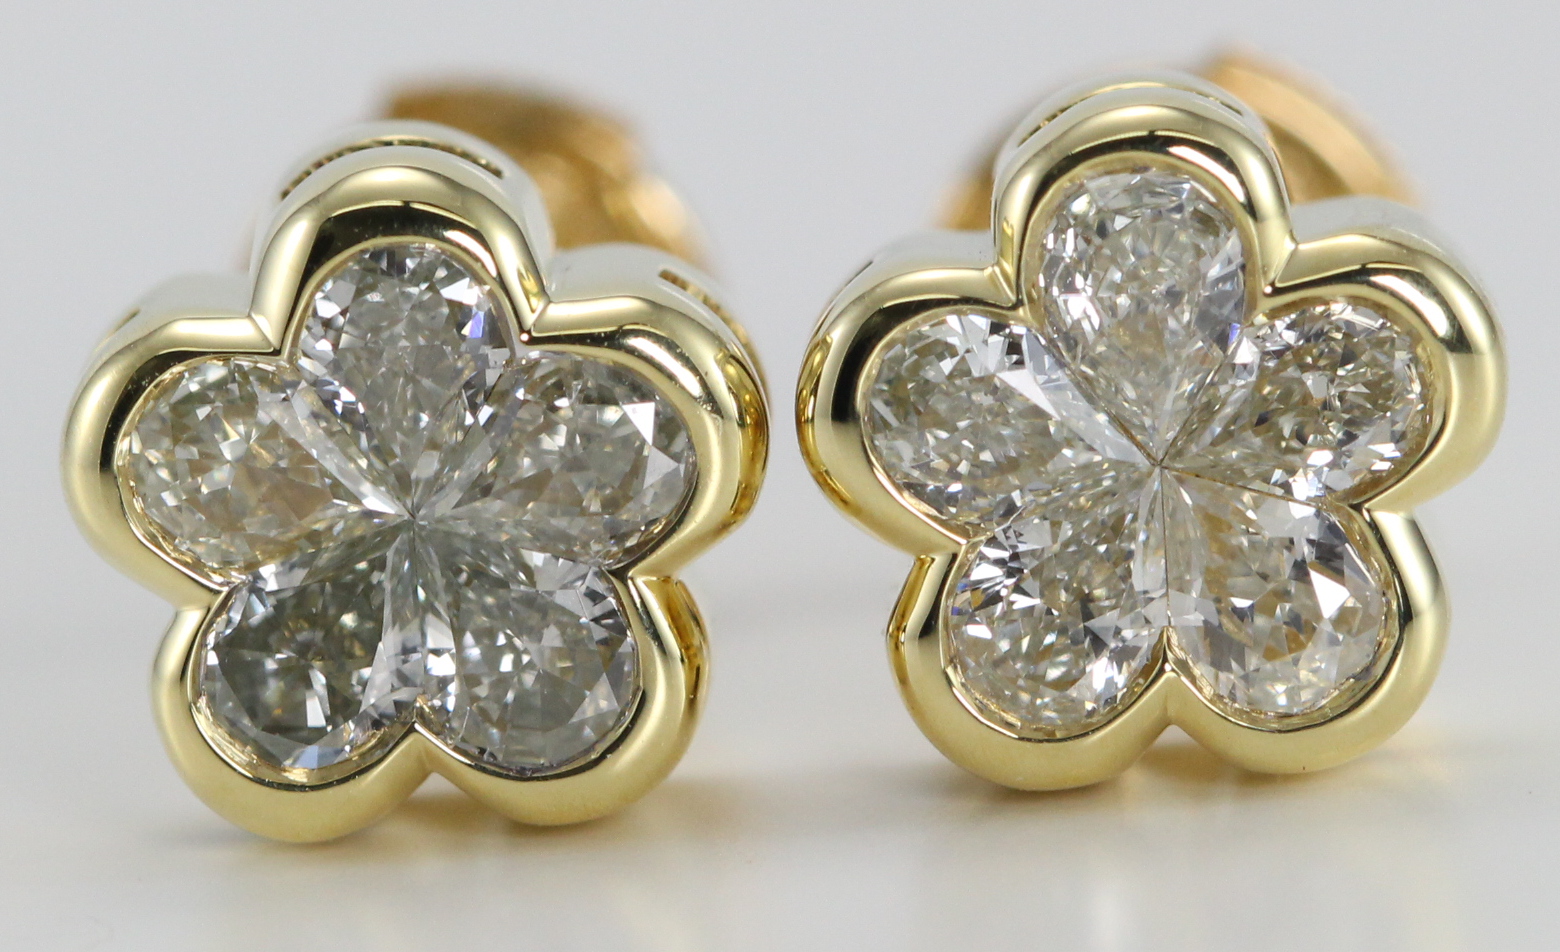 18k Yellow Gold Invisible Setting Pear Cut Diamond Flower Earrings (0.73 Ct, M-N Color, VS Clarity)